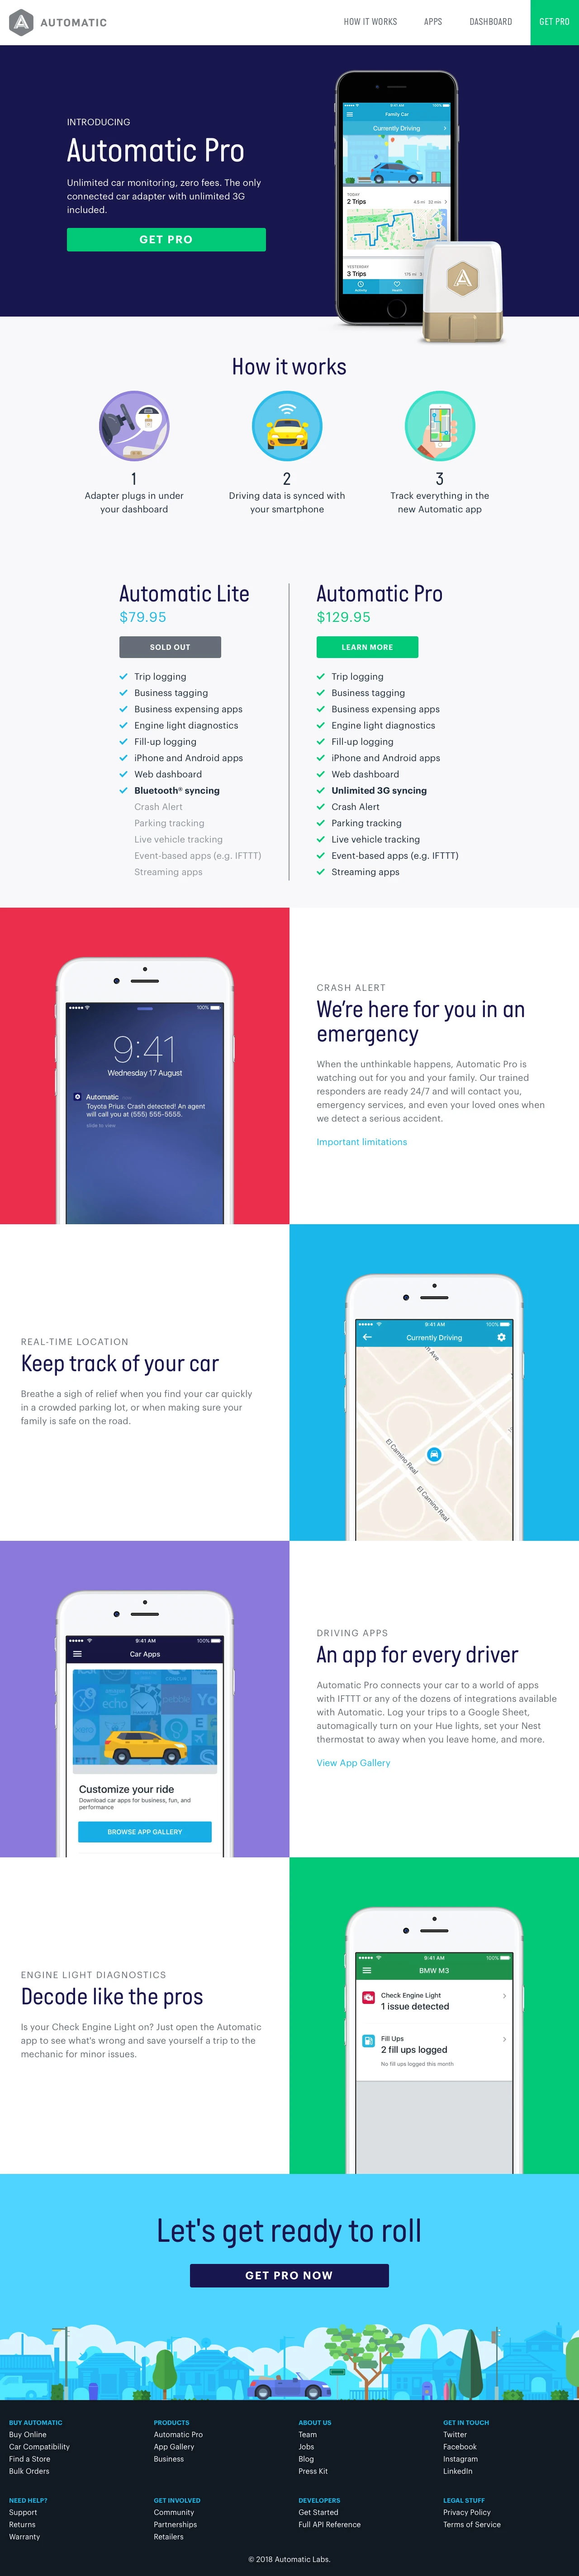 Automatic Landing Page Example: The Automatic app and plug-in car adapter turns just about any car into a connected car. Diagnose check engine codes, get driving feedback, mileage tracking and expensing, emergency service in a crash, and more. Explore the Automatic App Gallery to find an app for any driver.